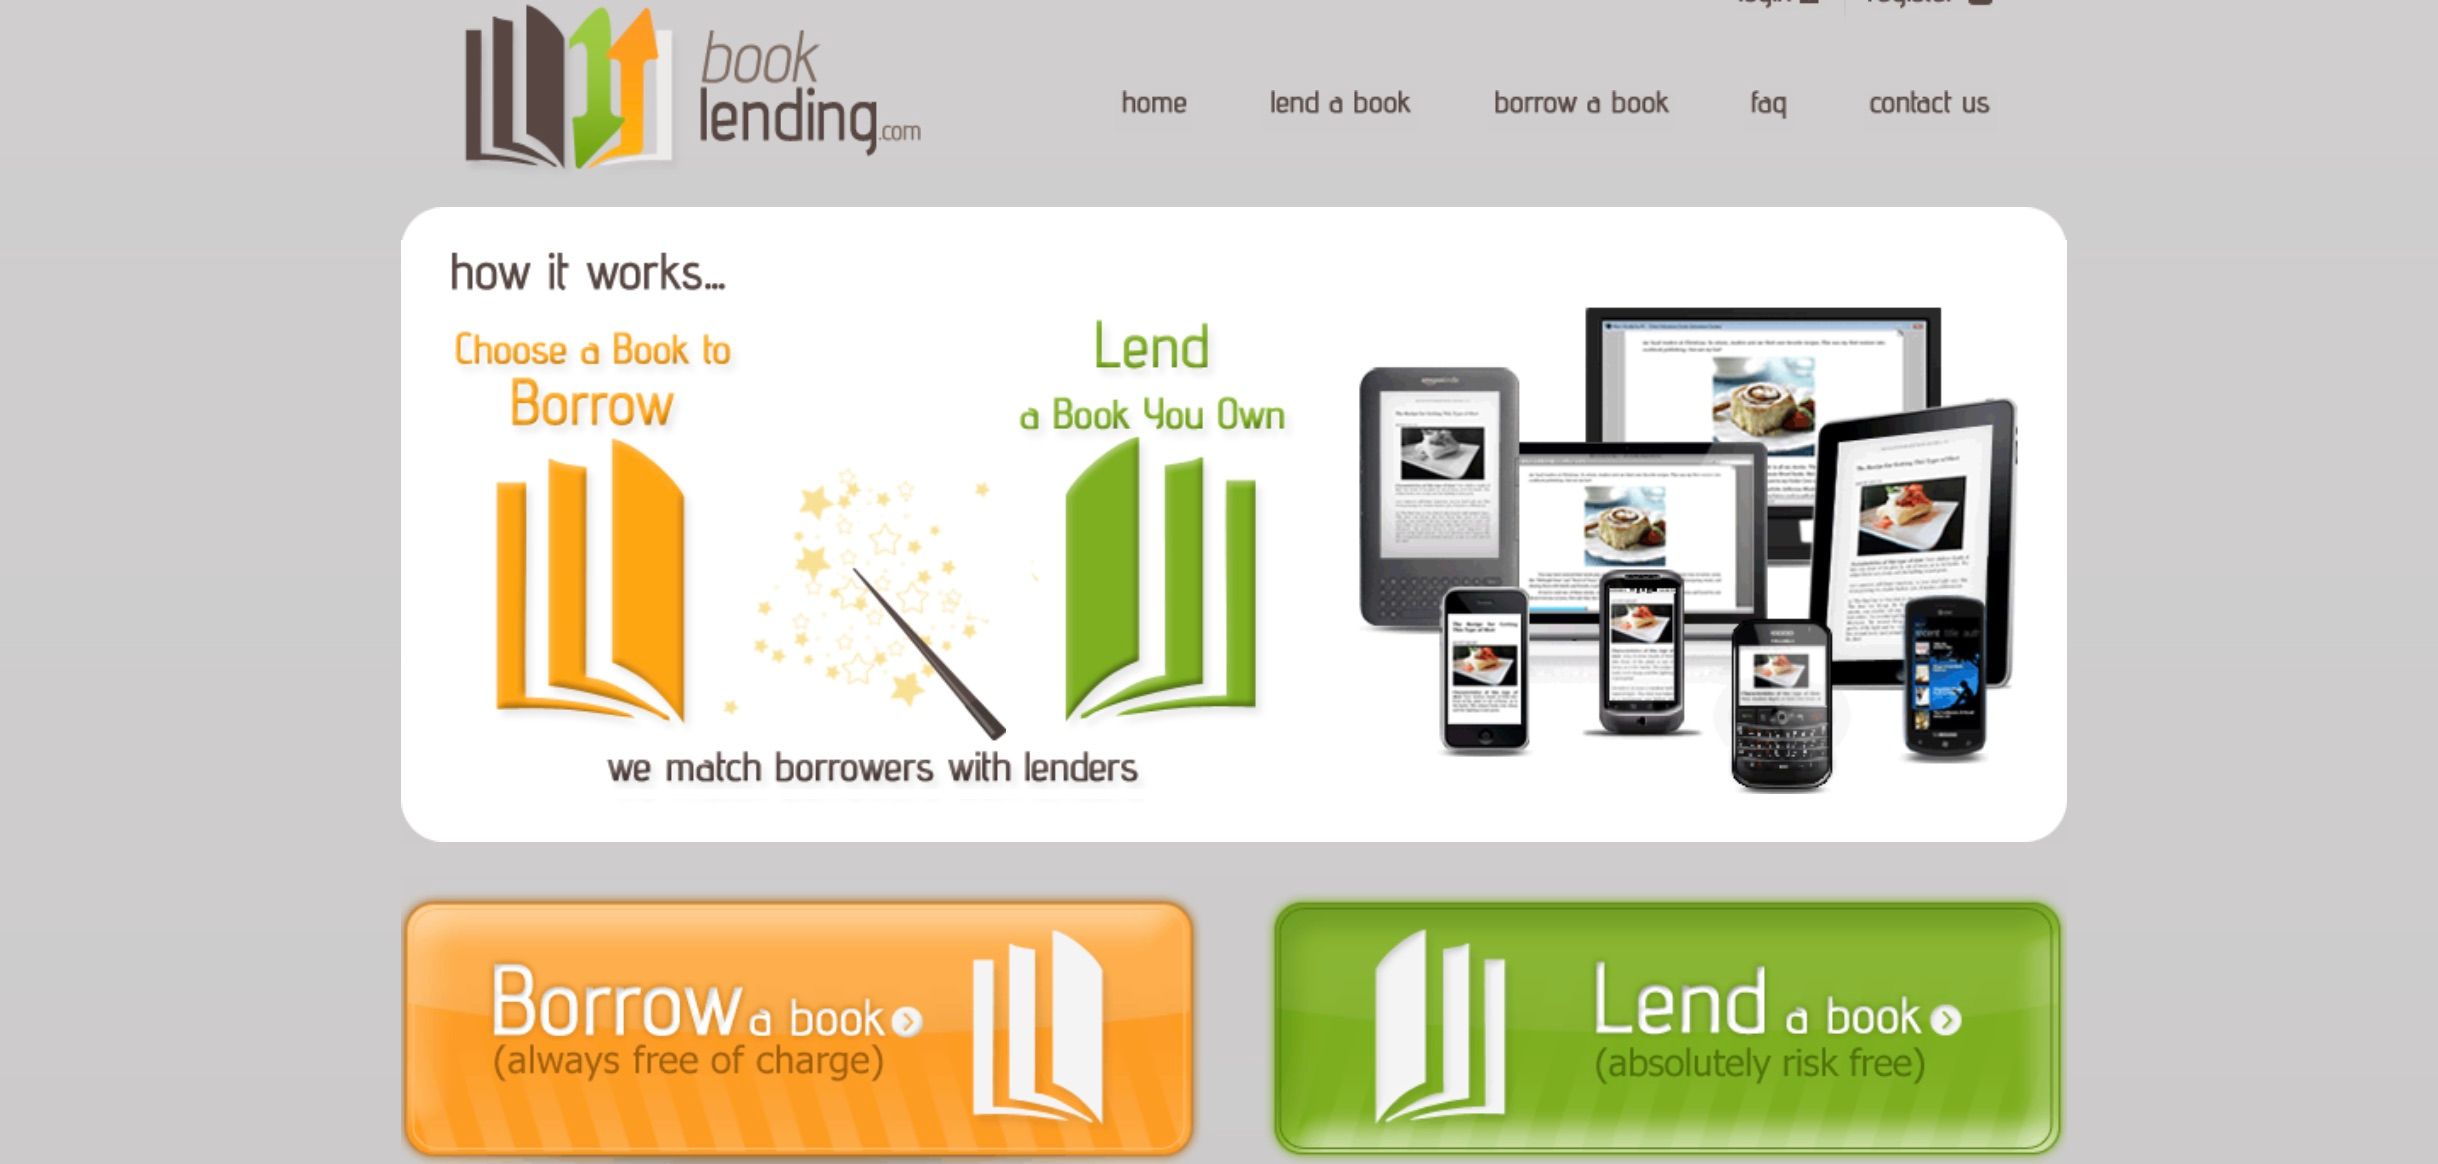 Screenshot of Booklending website home page